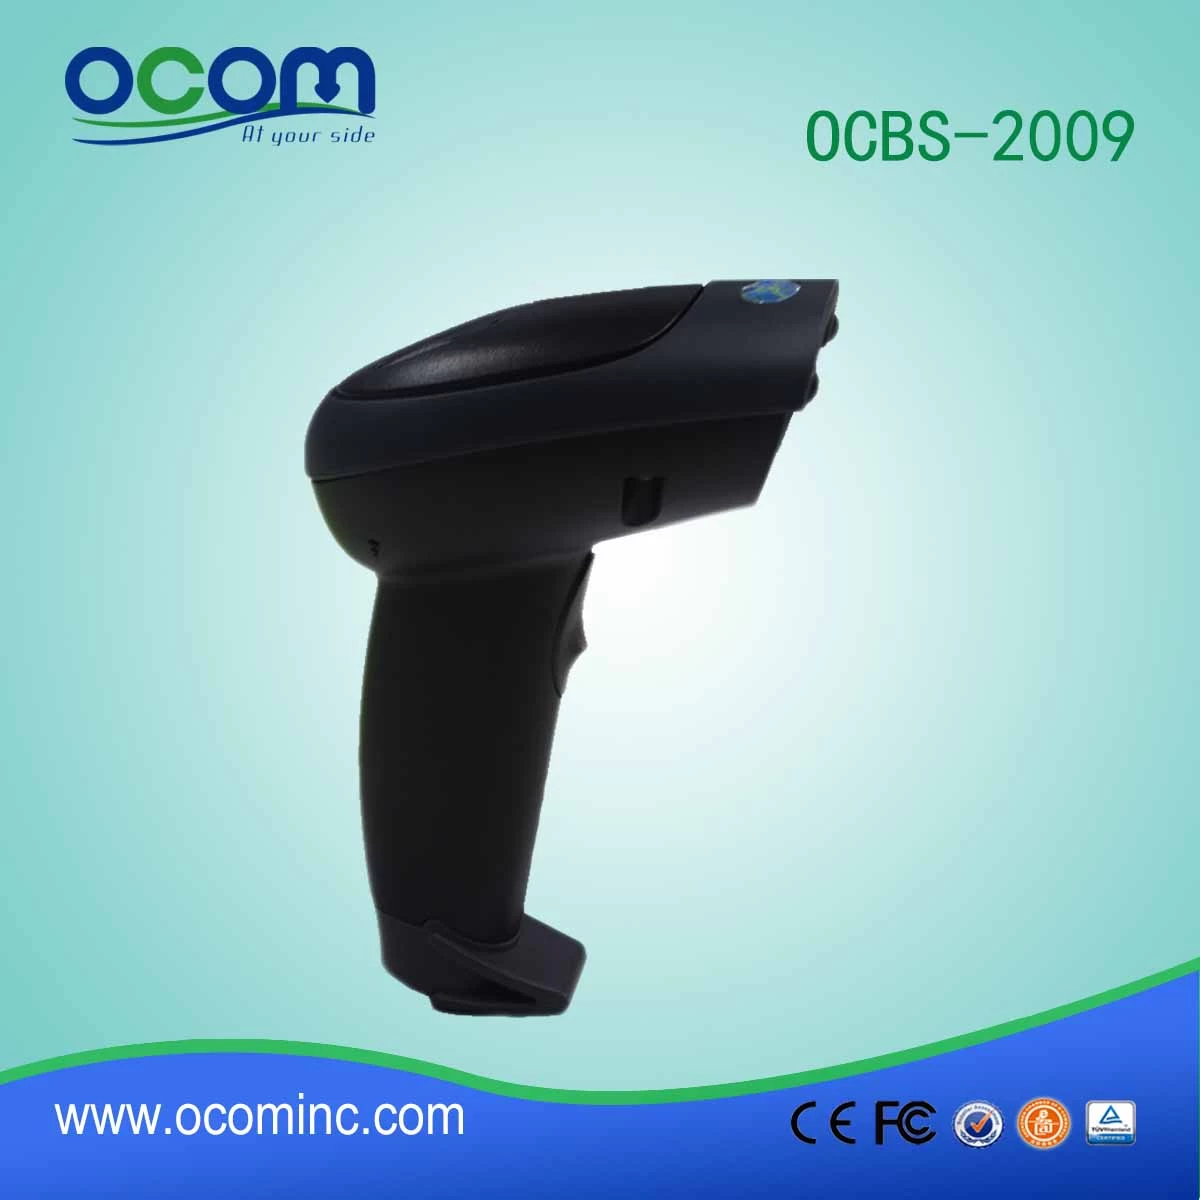 Handheld 2D image barcode scanner Can read the barcode on the screen